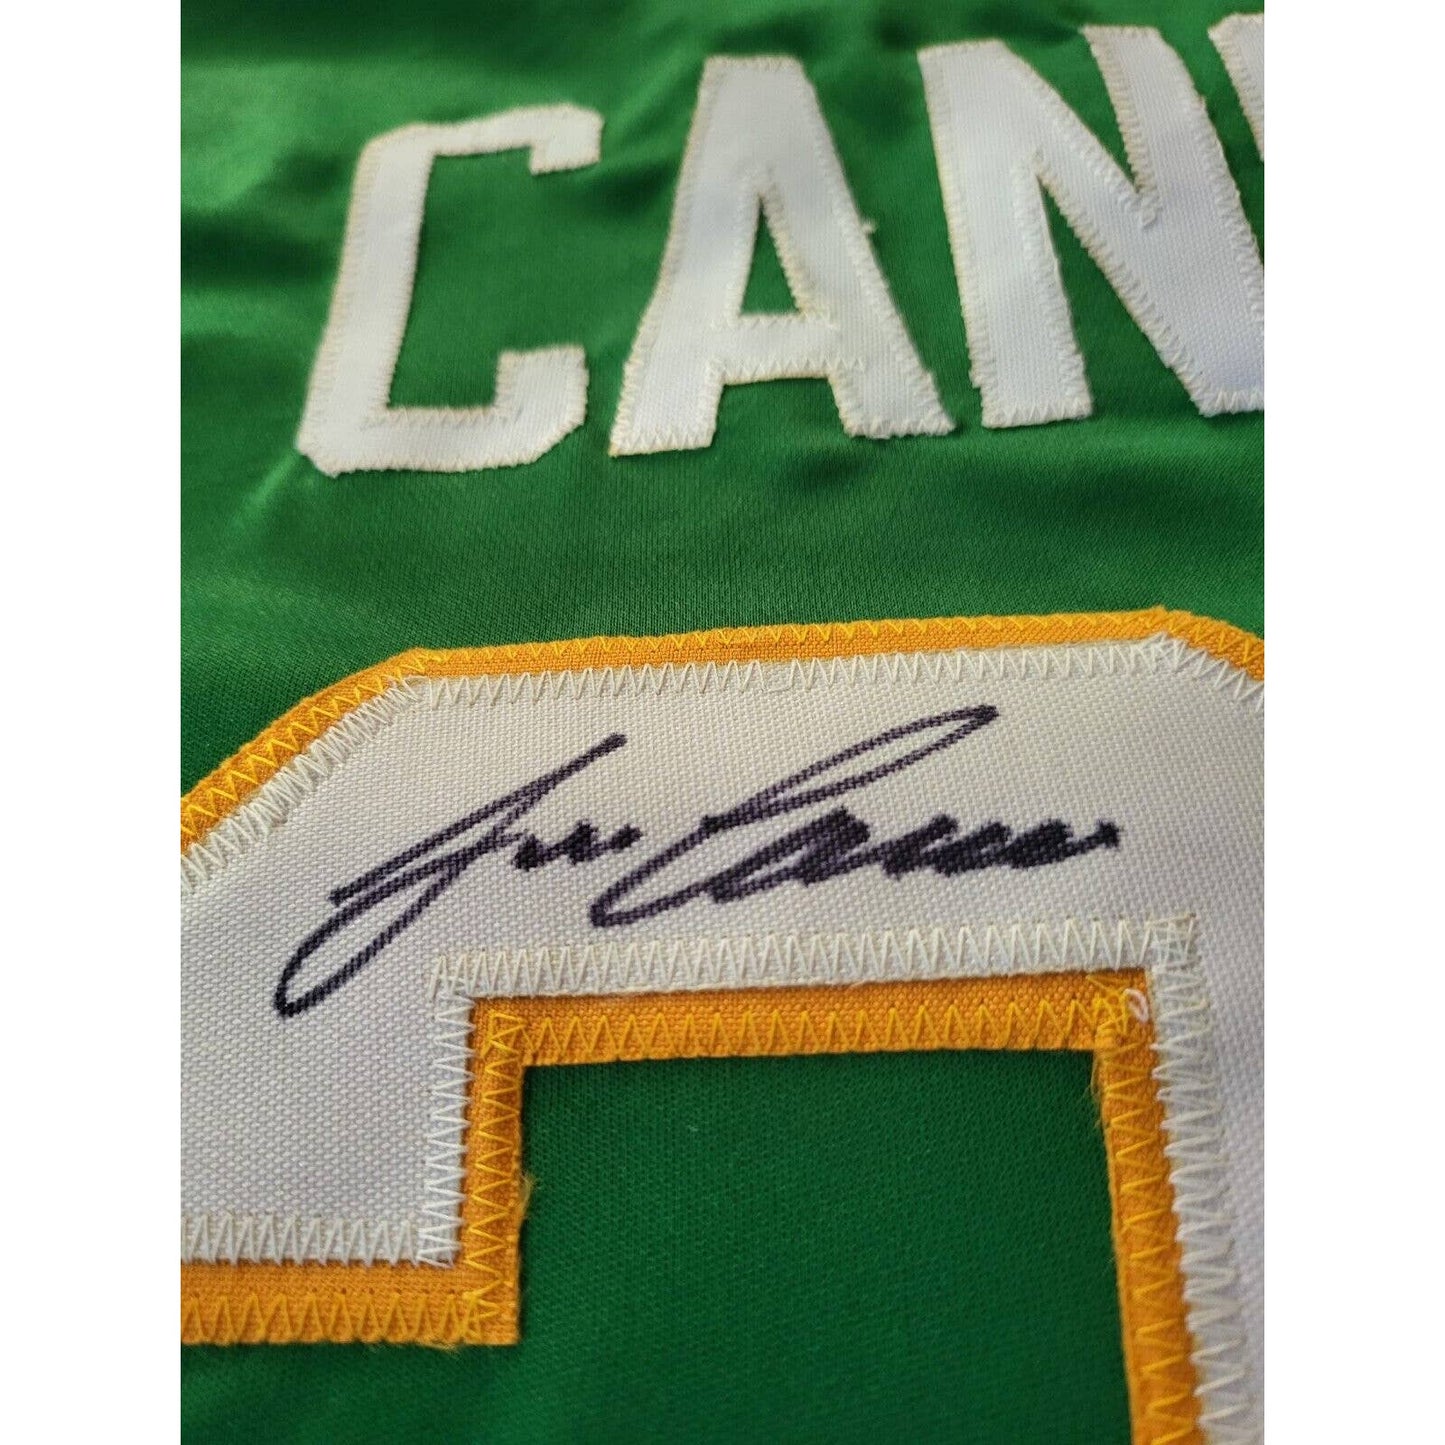 Jose Canseco Autographed/Signed Jersey JSA COA Oakland Athletics A’s Bash Bros - TreasuresEvolved